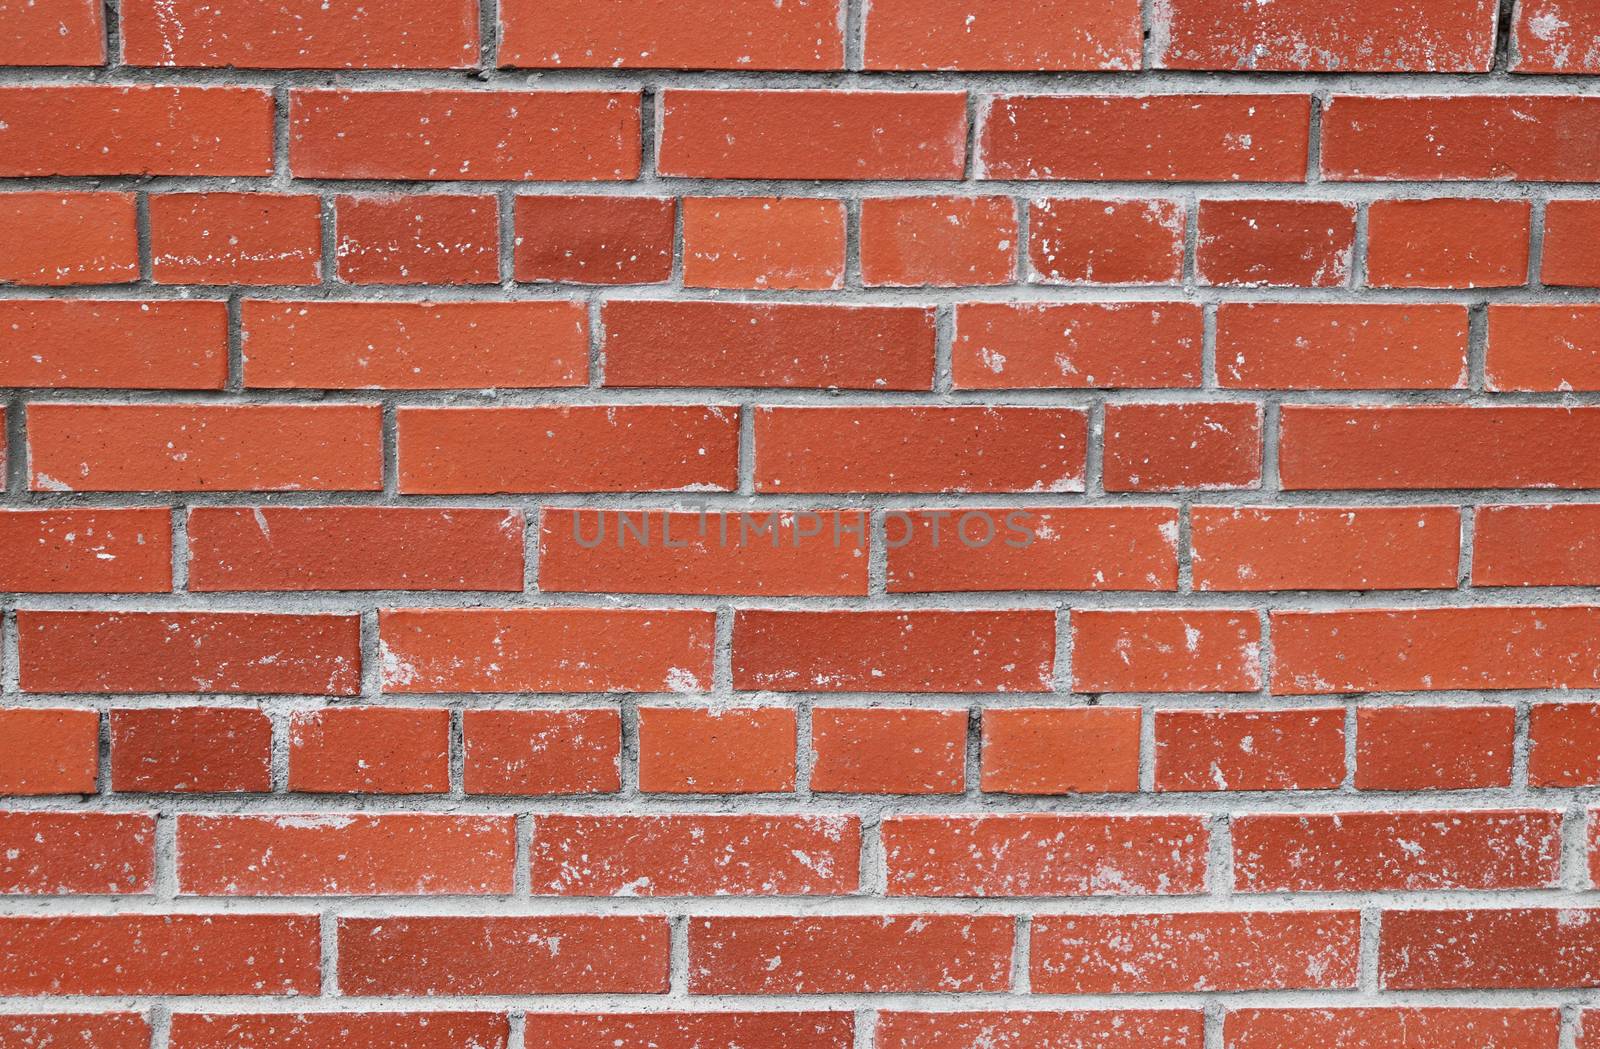 Cement stains red bricks wall texture.